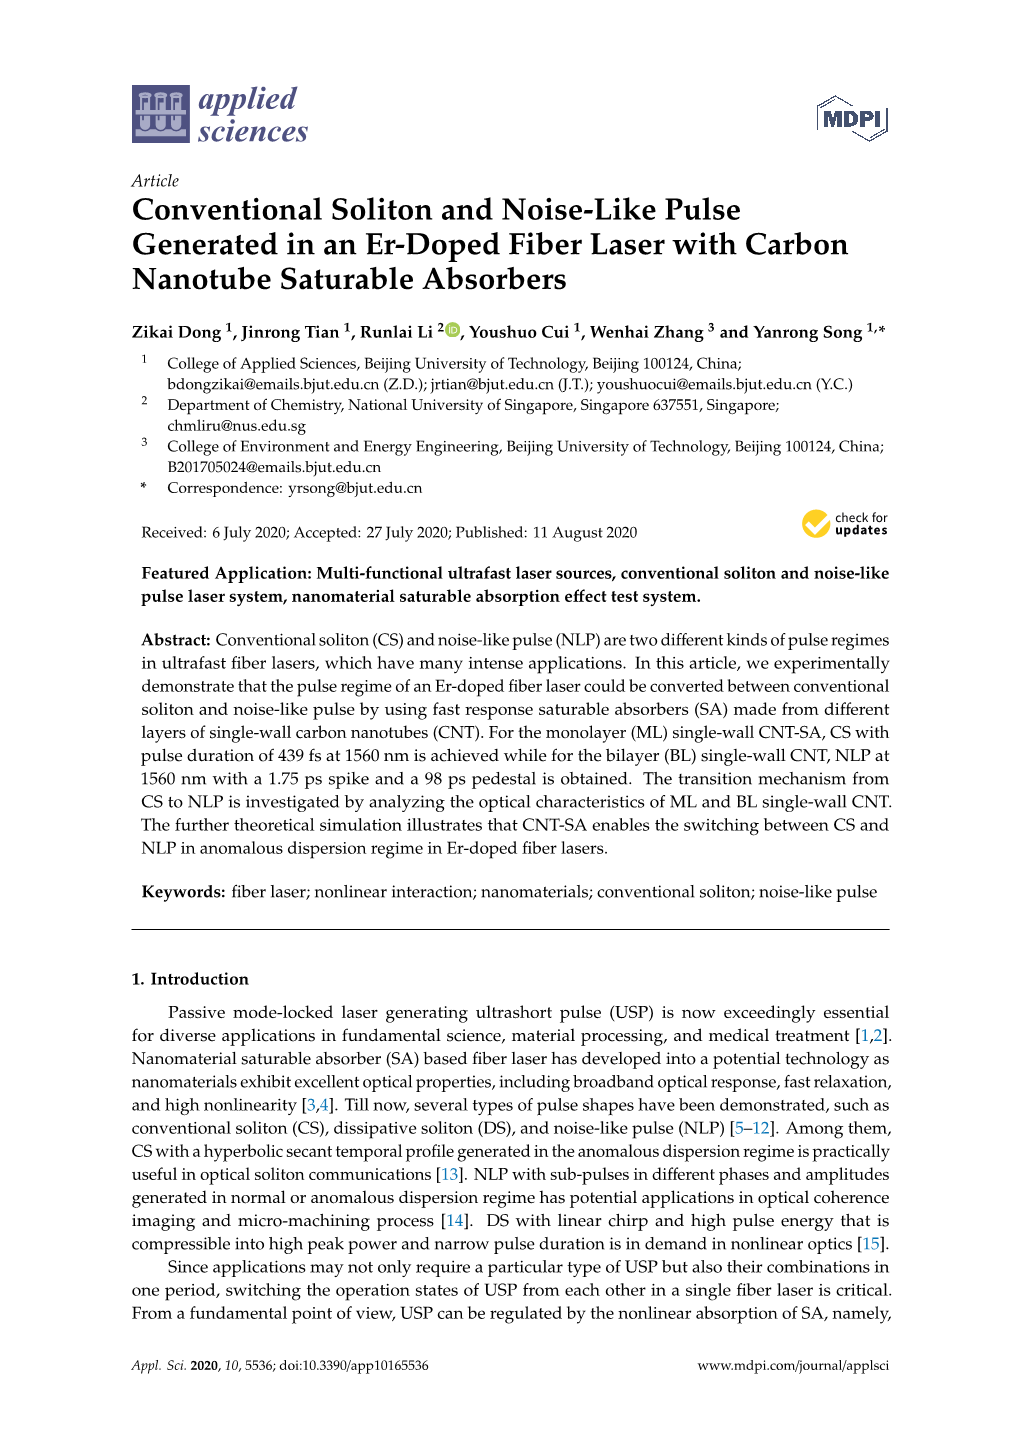 Conventional Soliton and Noise-Like Pulse Generated in an Er-Doped Fiber Laser with Carbon Nanotube Saturable Absorbers